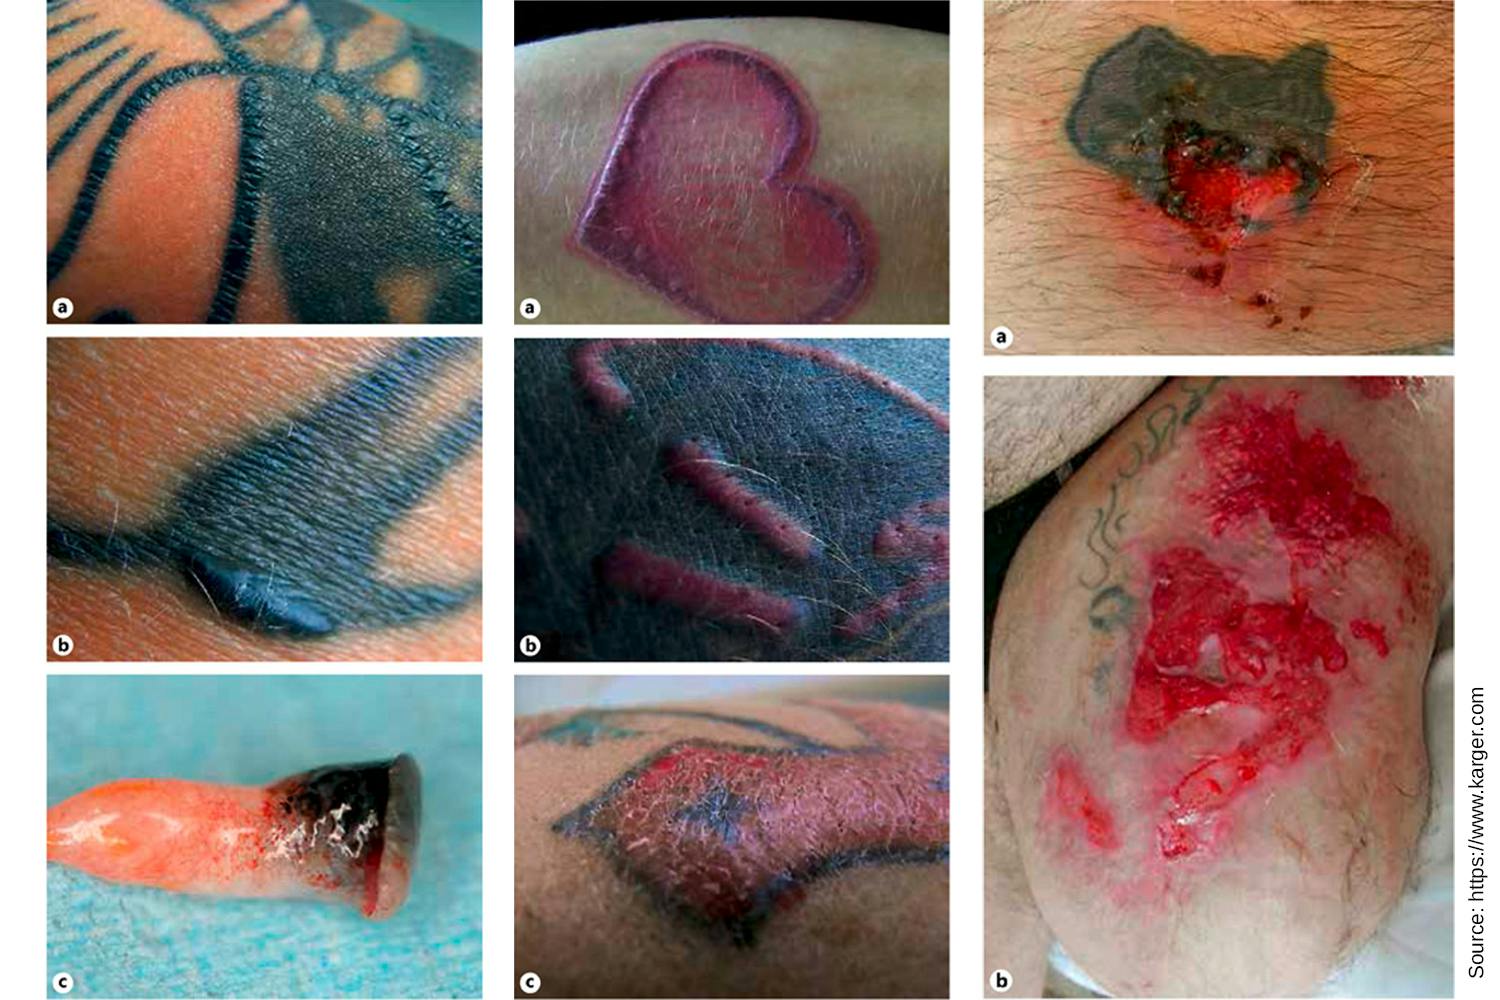 The researchers, led by Dr. Ines Schreiver, analyzed 58 commercially available tattoo inks, shedding light on the dark side of the tattoo industry.